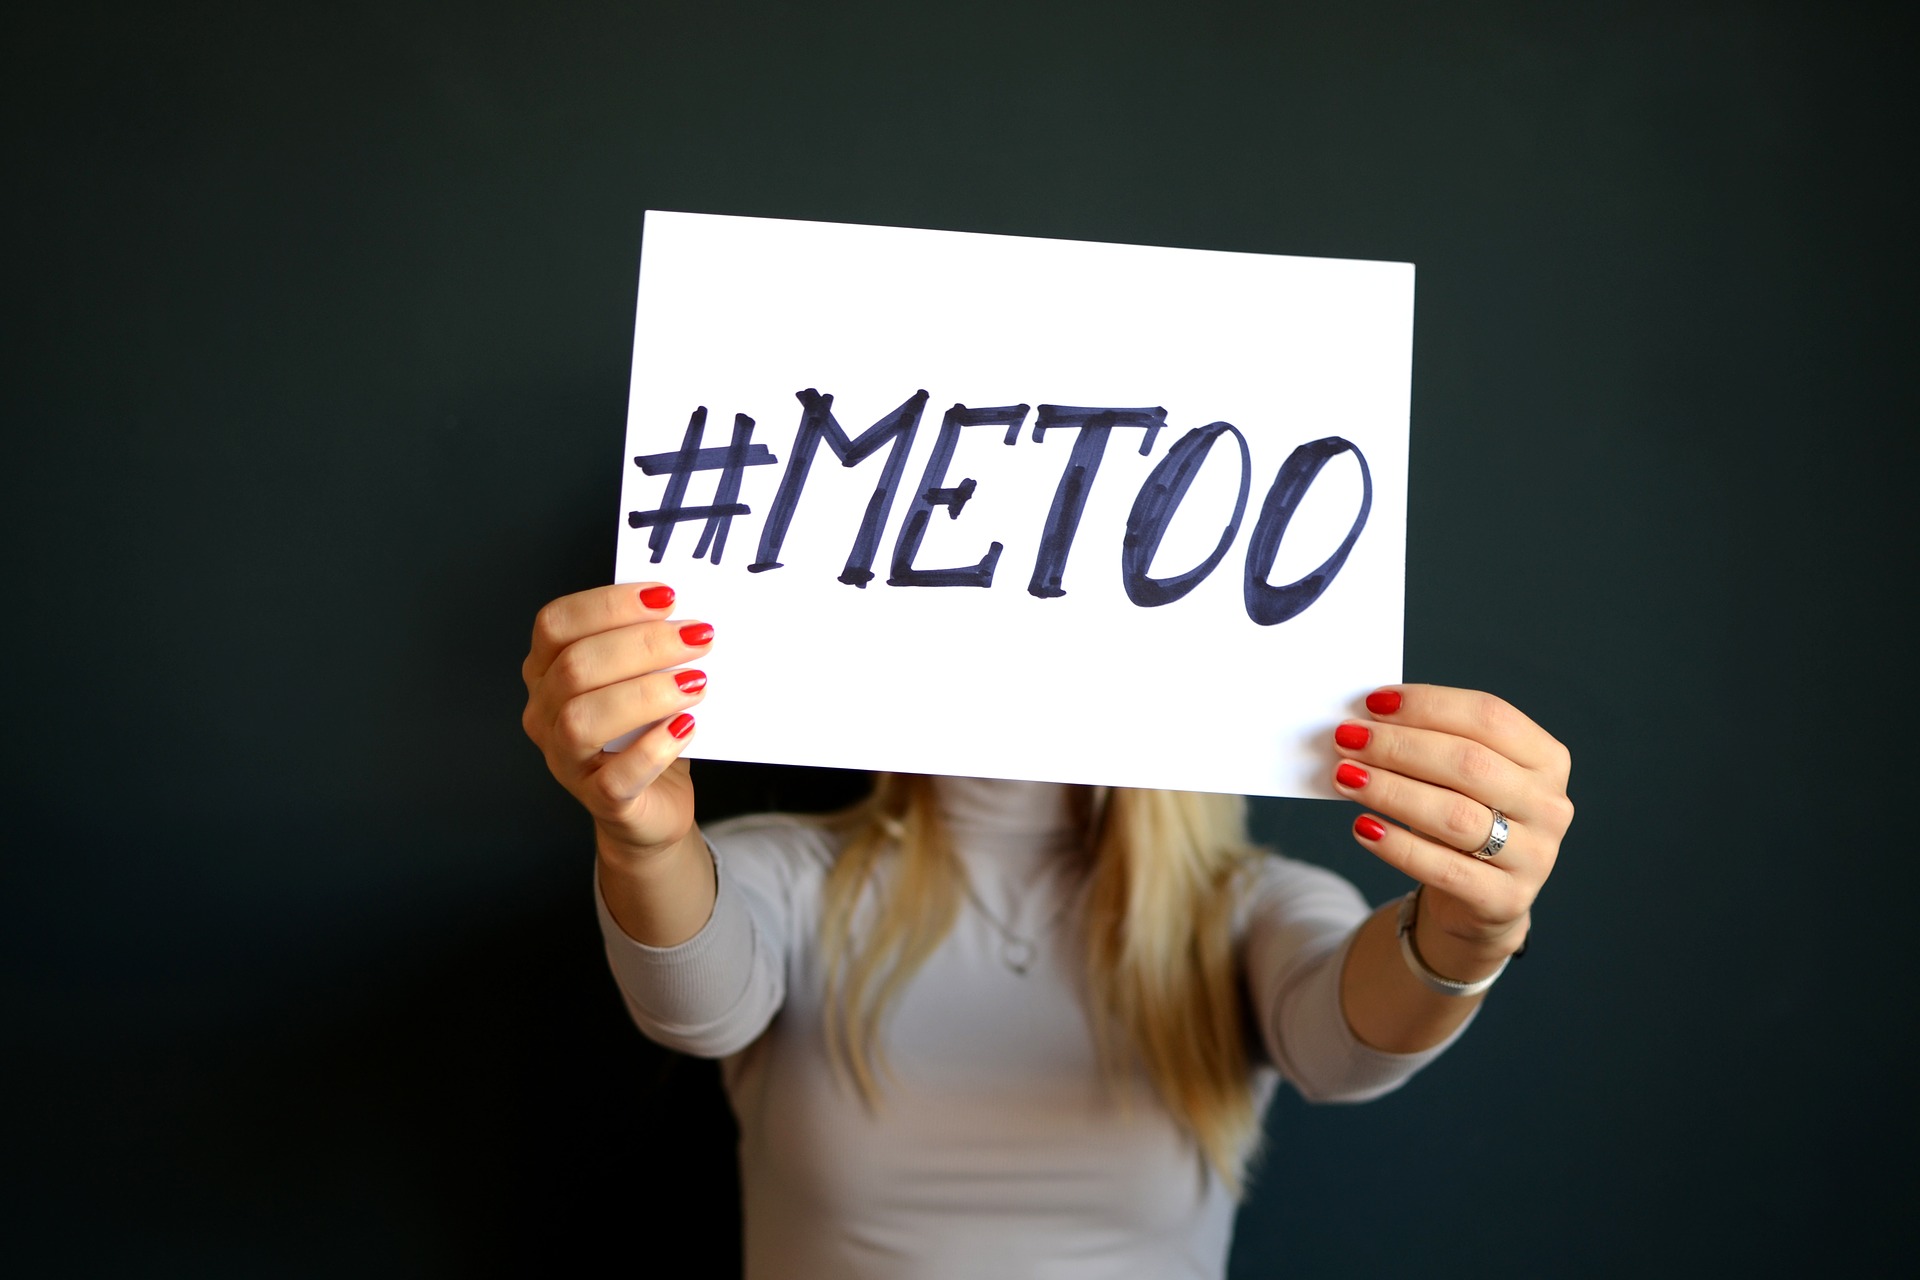 ny-state-sexual-harassment-laws-metoo-sign